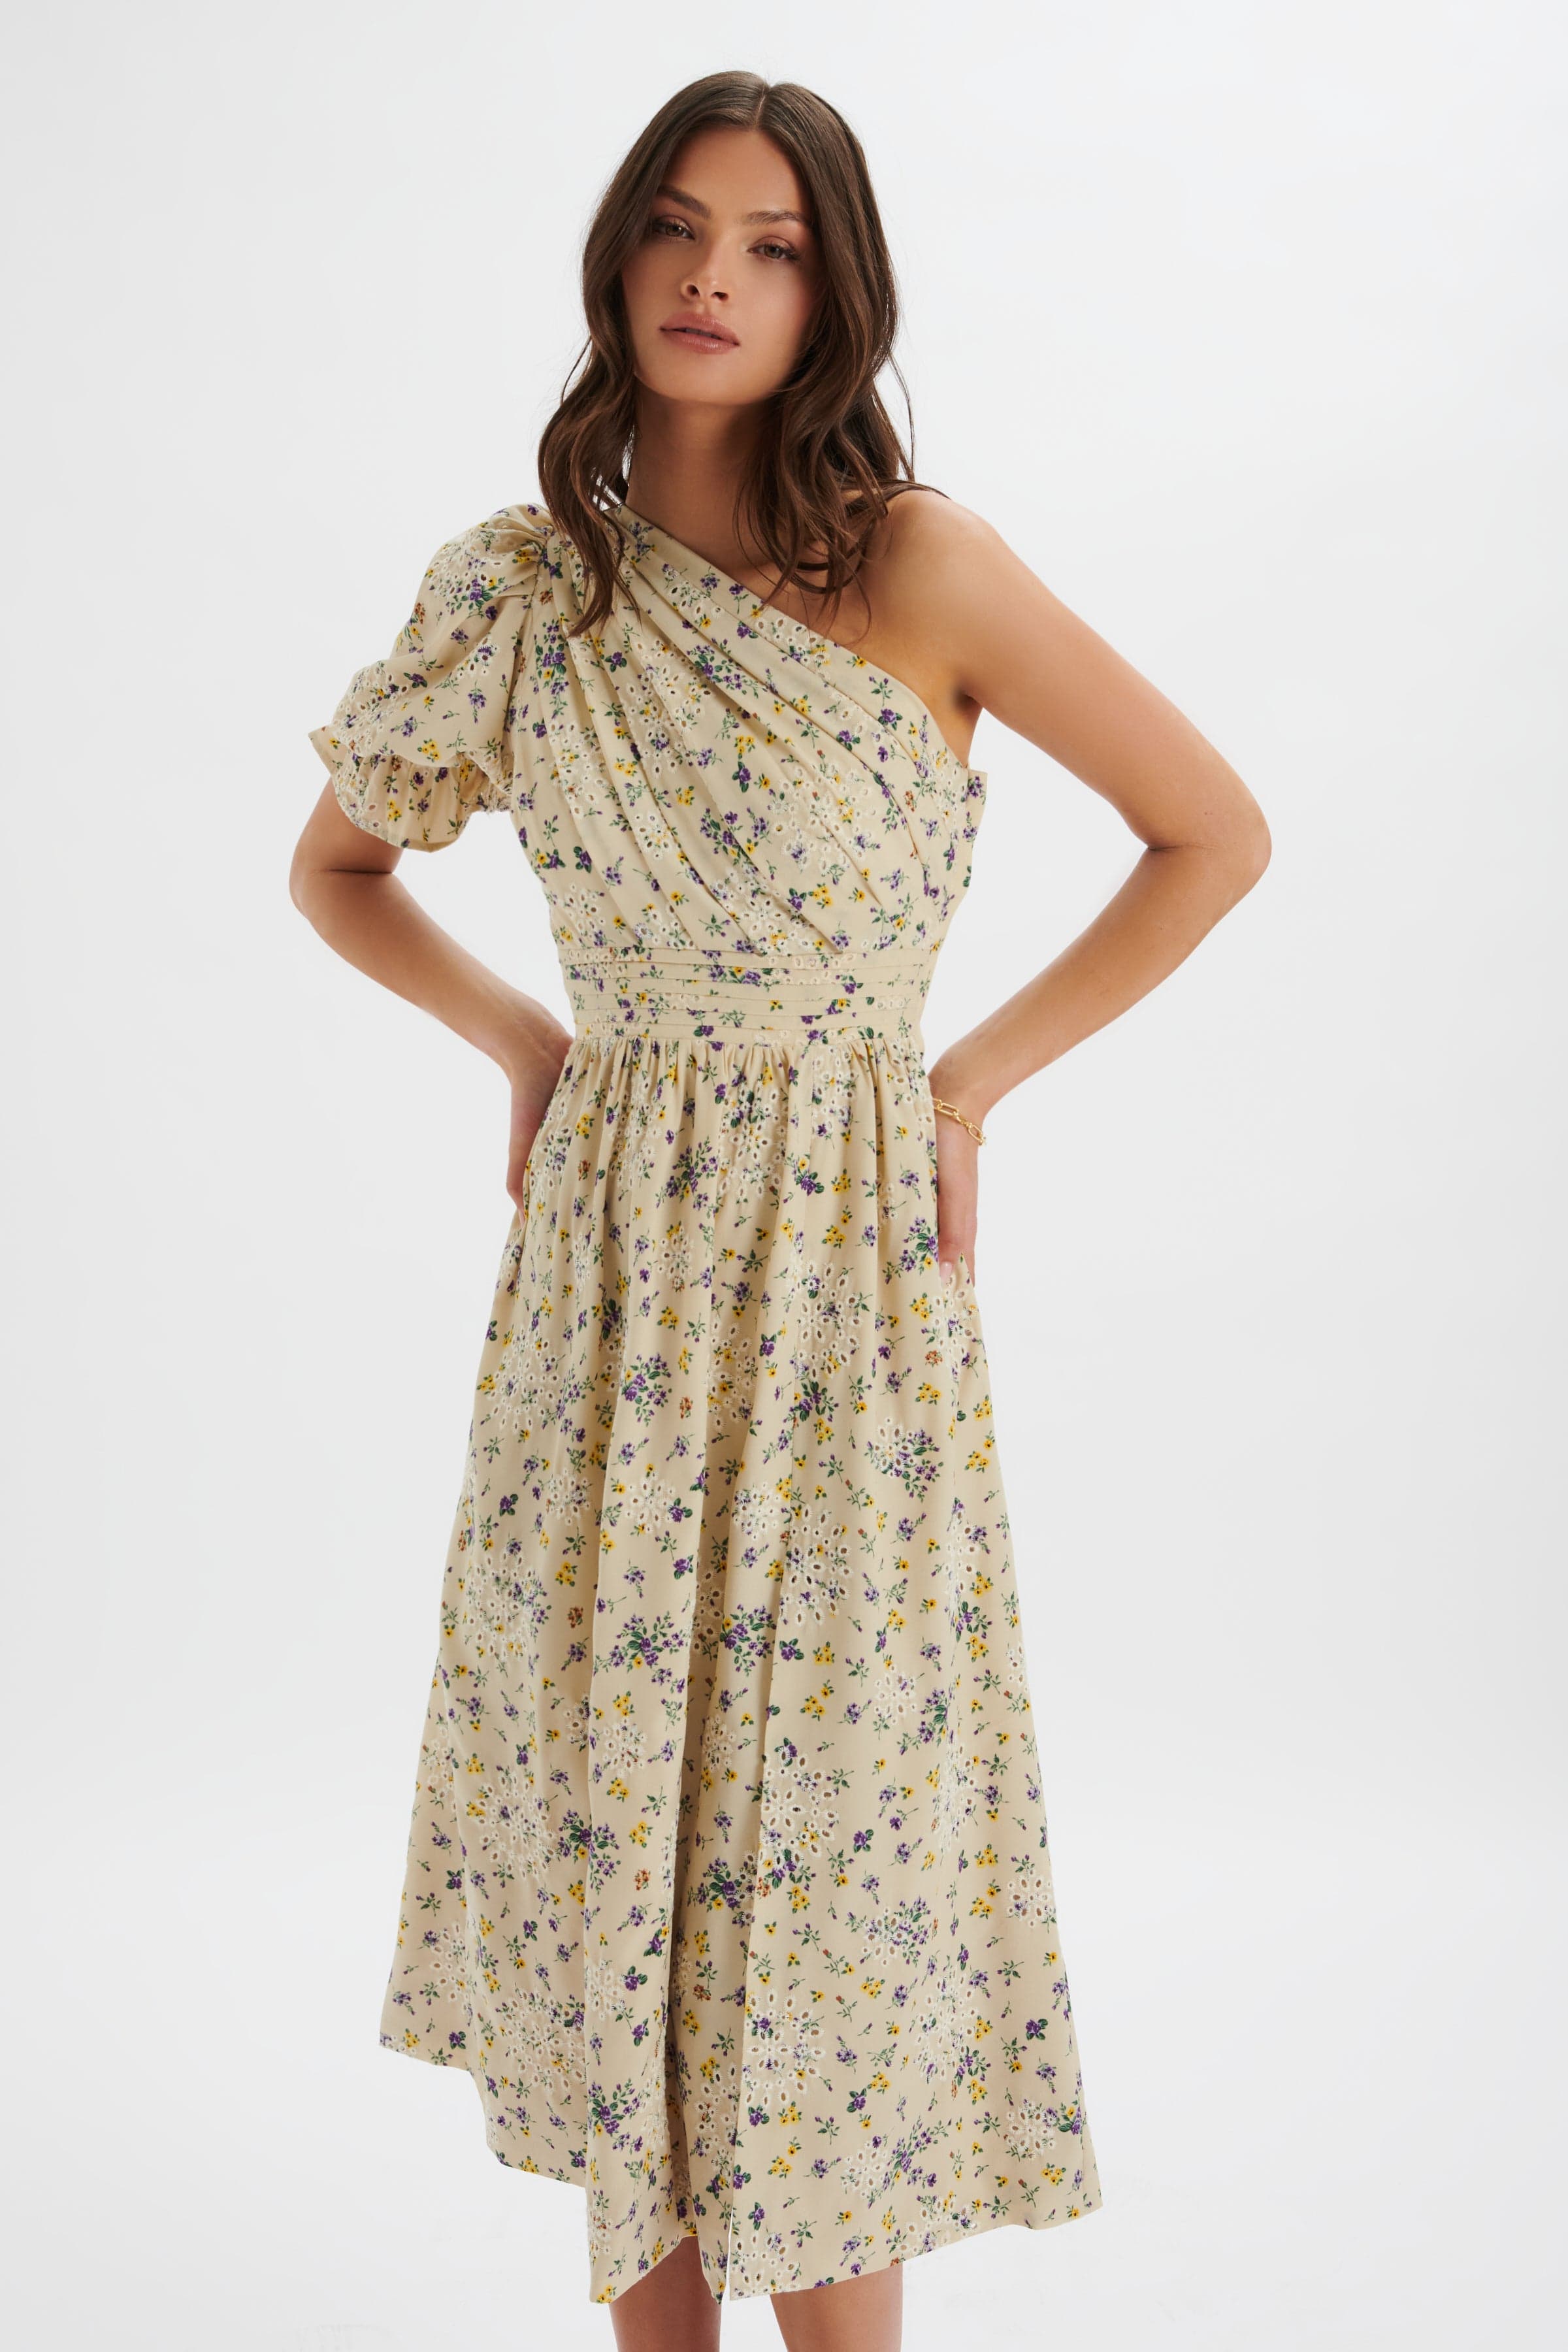 POLLY One Shoulder Puff Sleeve Midi Dress in Floral Broidery